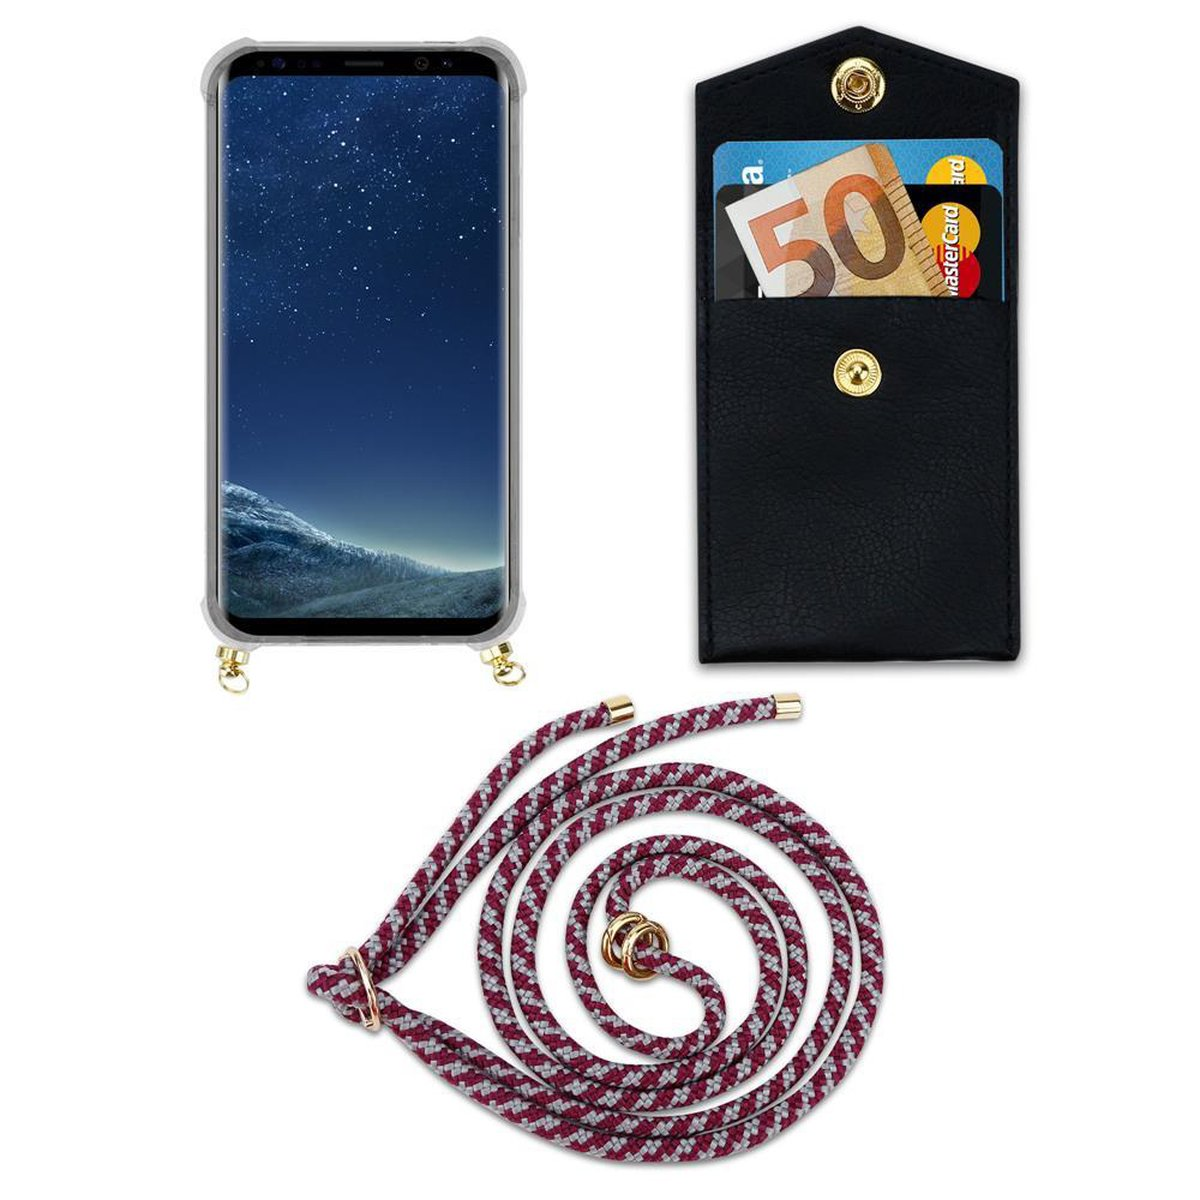 PLUS, ROT Samsung, Kette abnehmbarer S8 Band CADORABO Galaxy Kordel WEIß Hülle, Ringen, Handy und mit Backcover, Gold